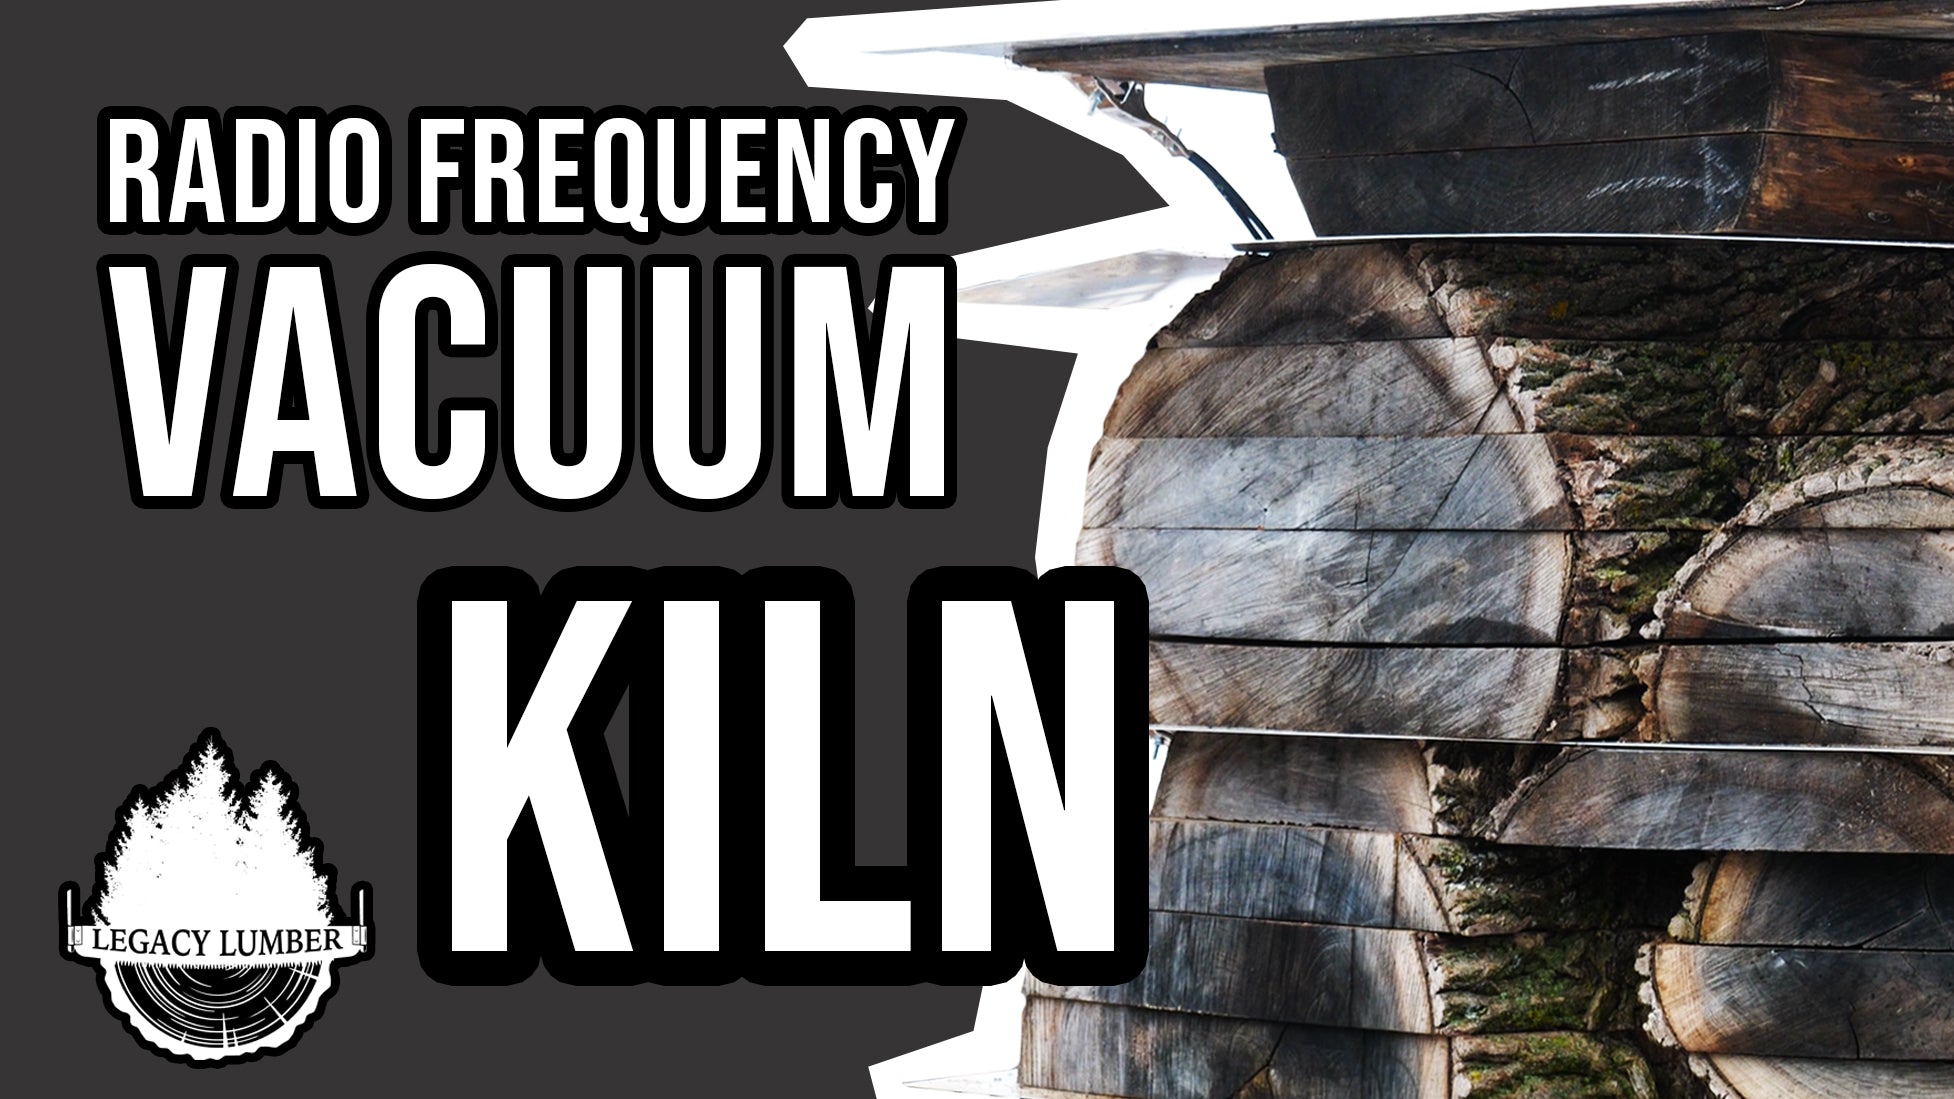 An in-depth look at our Radio Frequency Vacuum Kiln!